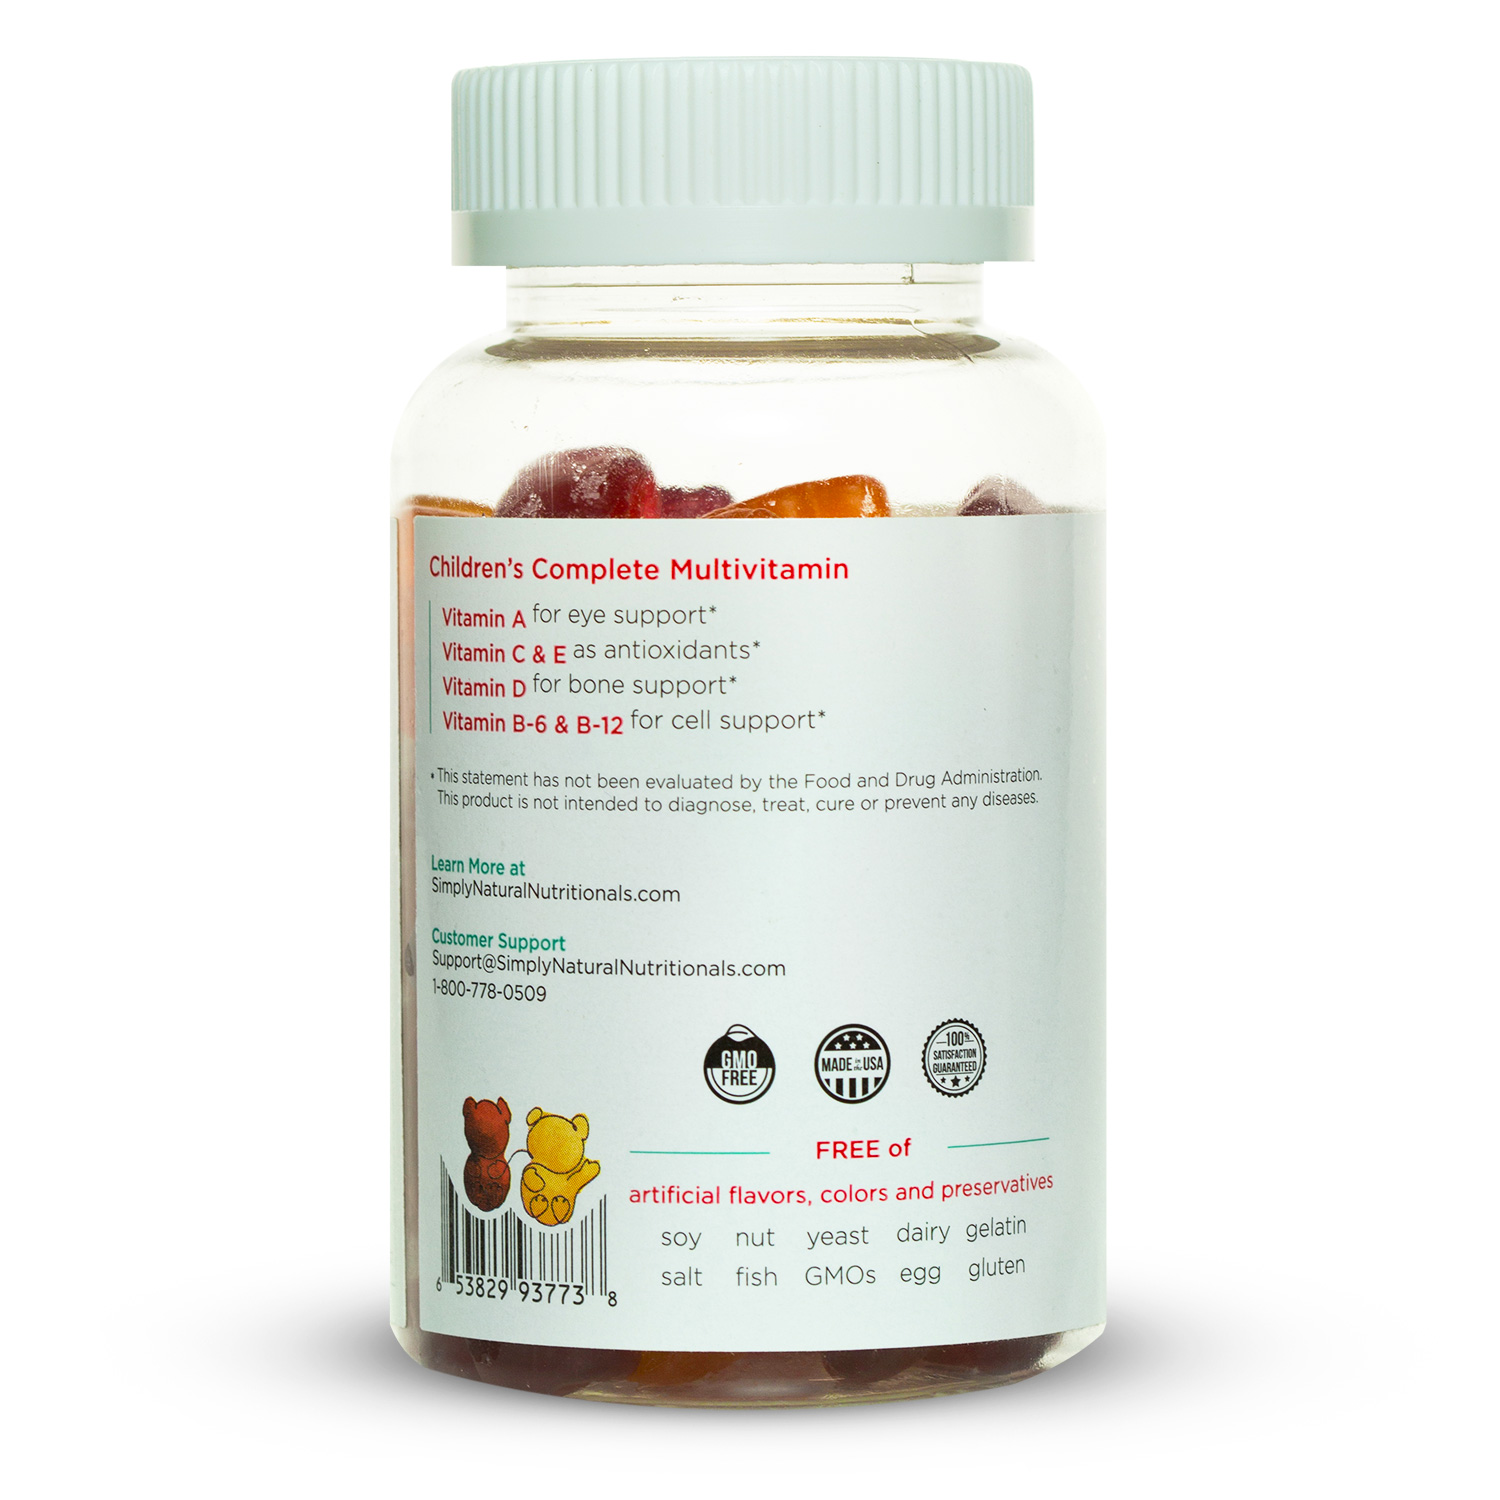 Simply Natural Nutritionals features 13 essential vitamins and minerals.